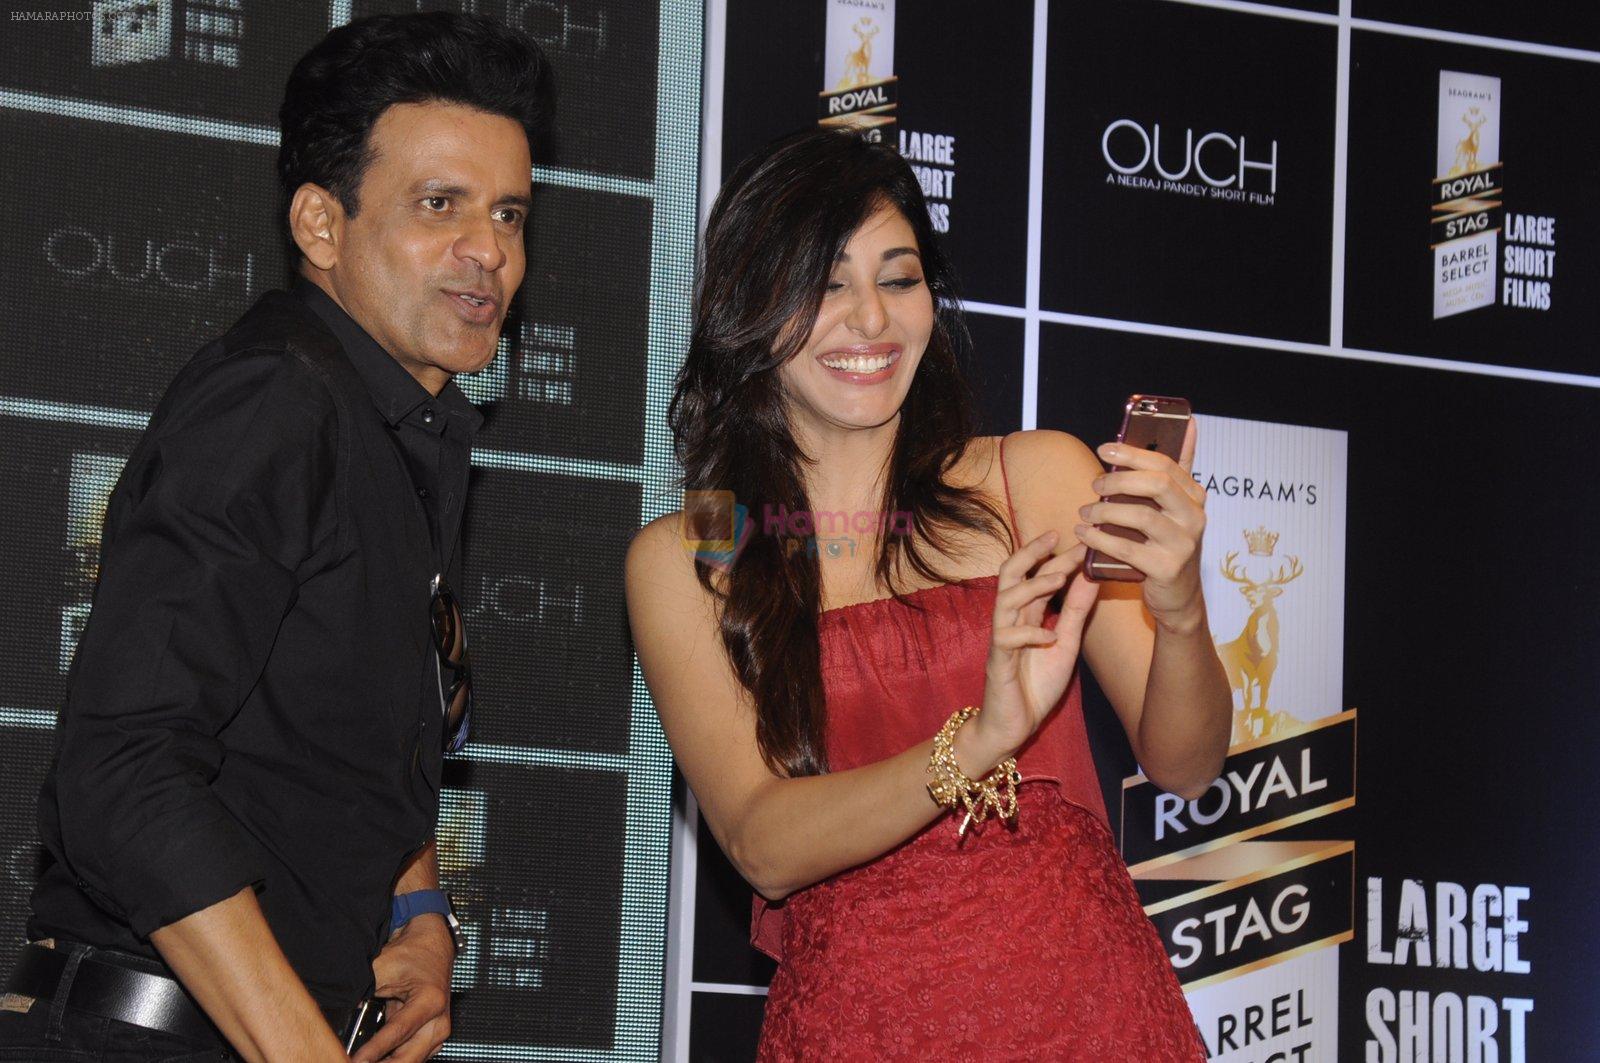 Pooja Chopra and Manoj Bajpai at Royal Stag event on 22nd Oct 2016